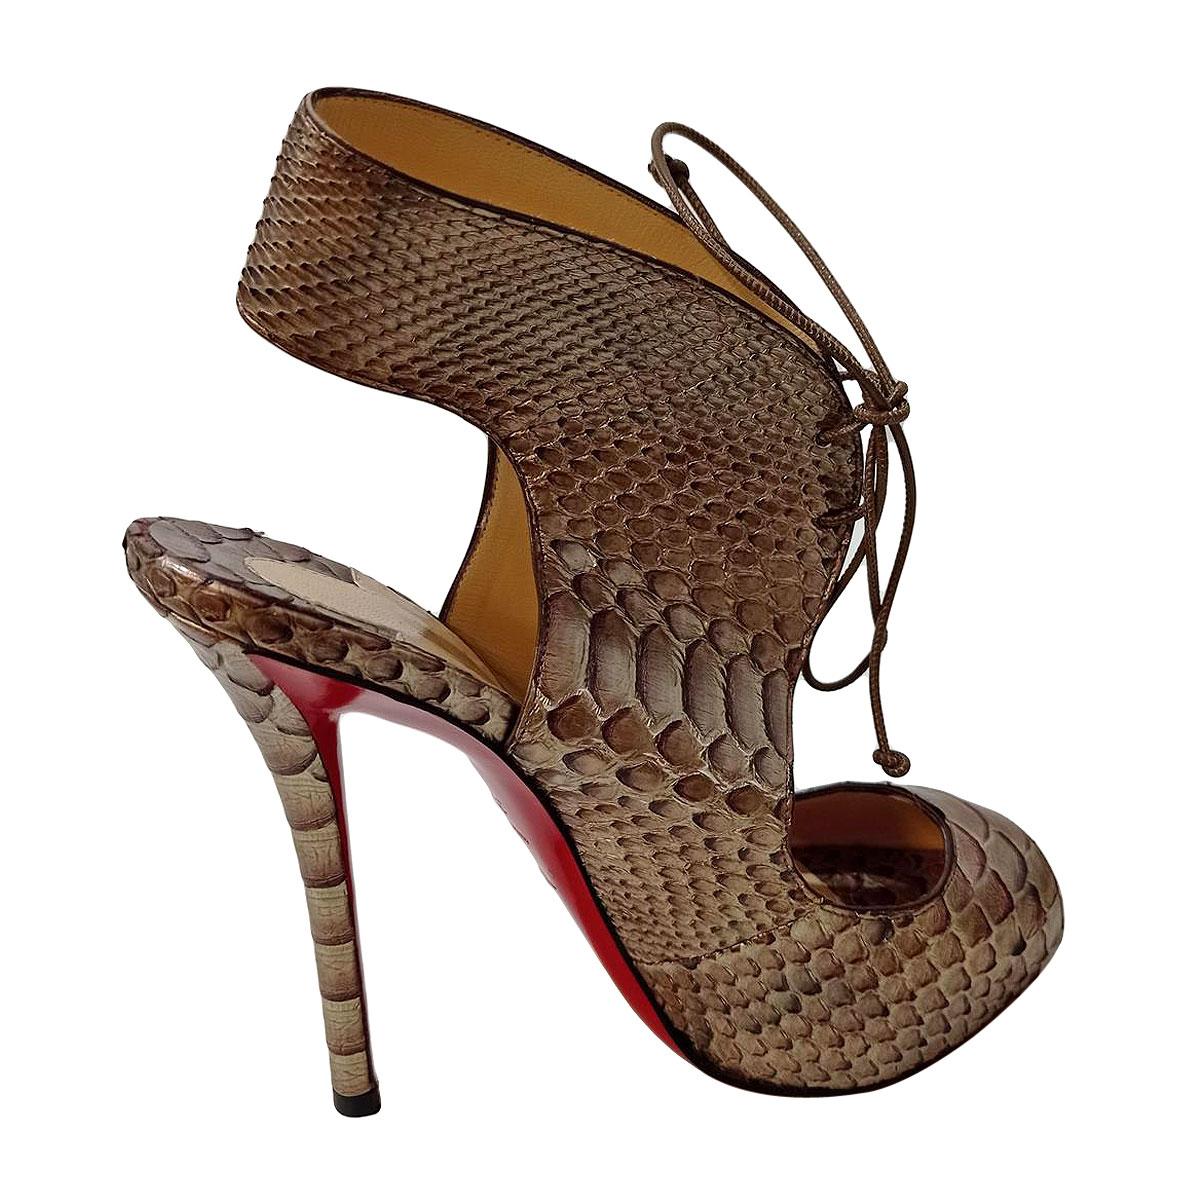 Amazing Louboutin sandal
Reptile leather
Golden color
Heel height cm 12,5 (4,92 inches)
With dustbagWorldwide express shipping included in the price !